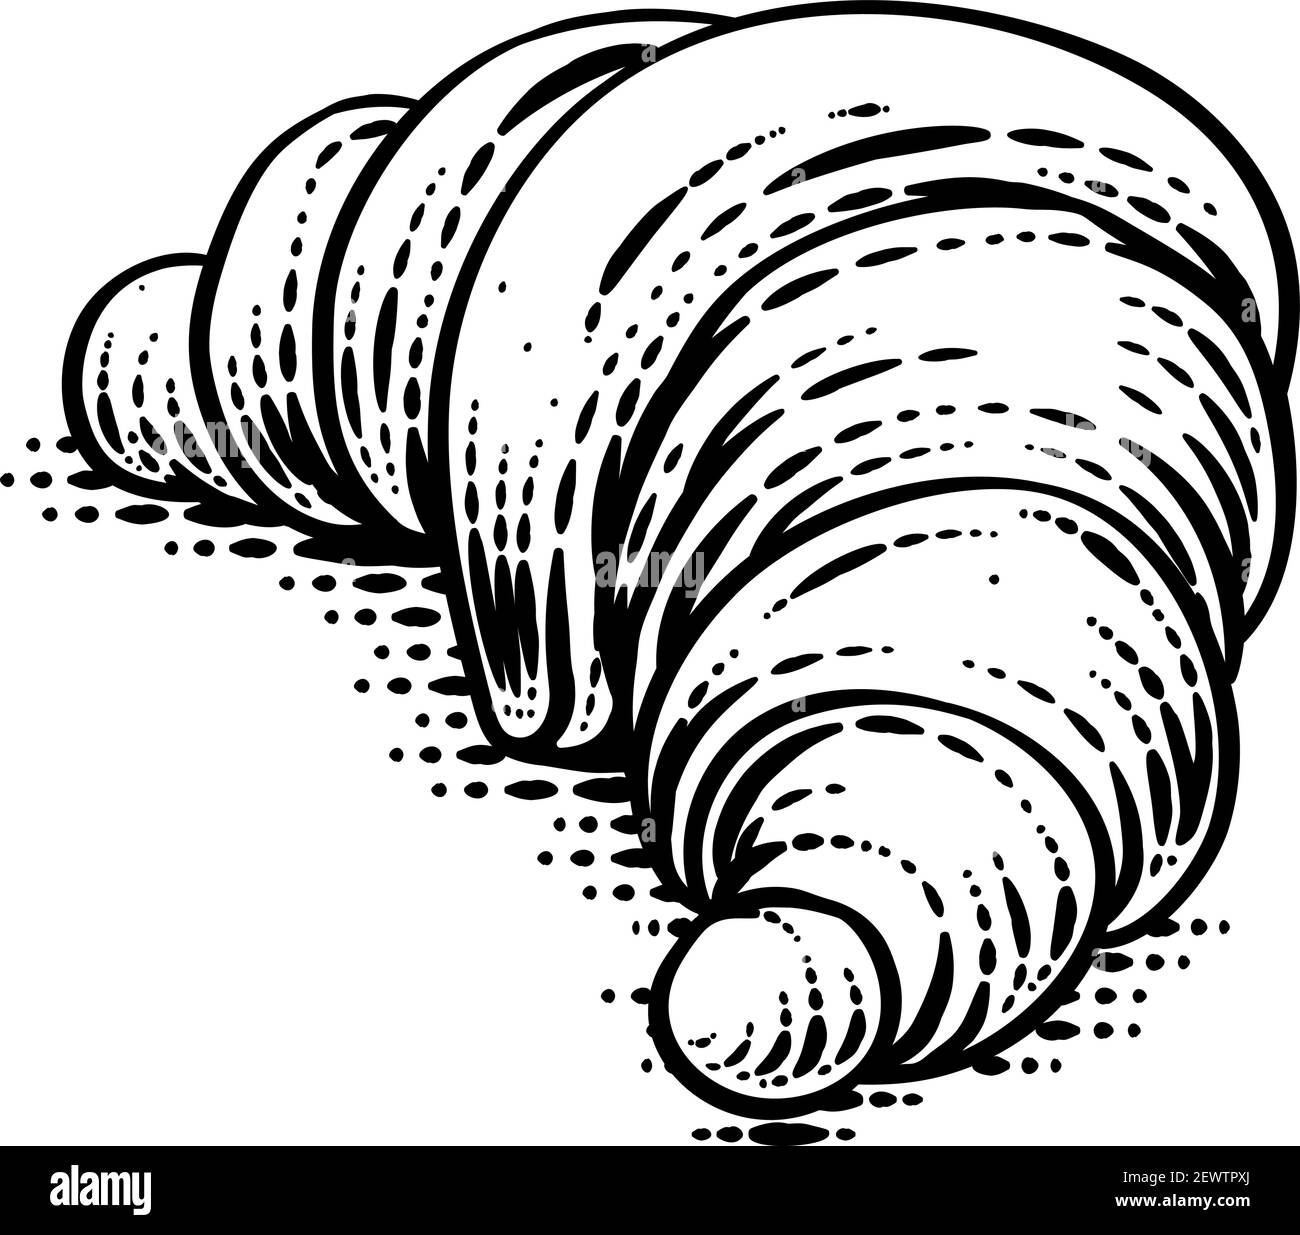 Croissant Pastry Bread Food Drawing Woodcut Stock Vector